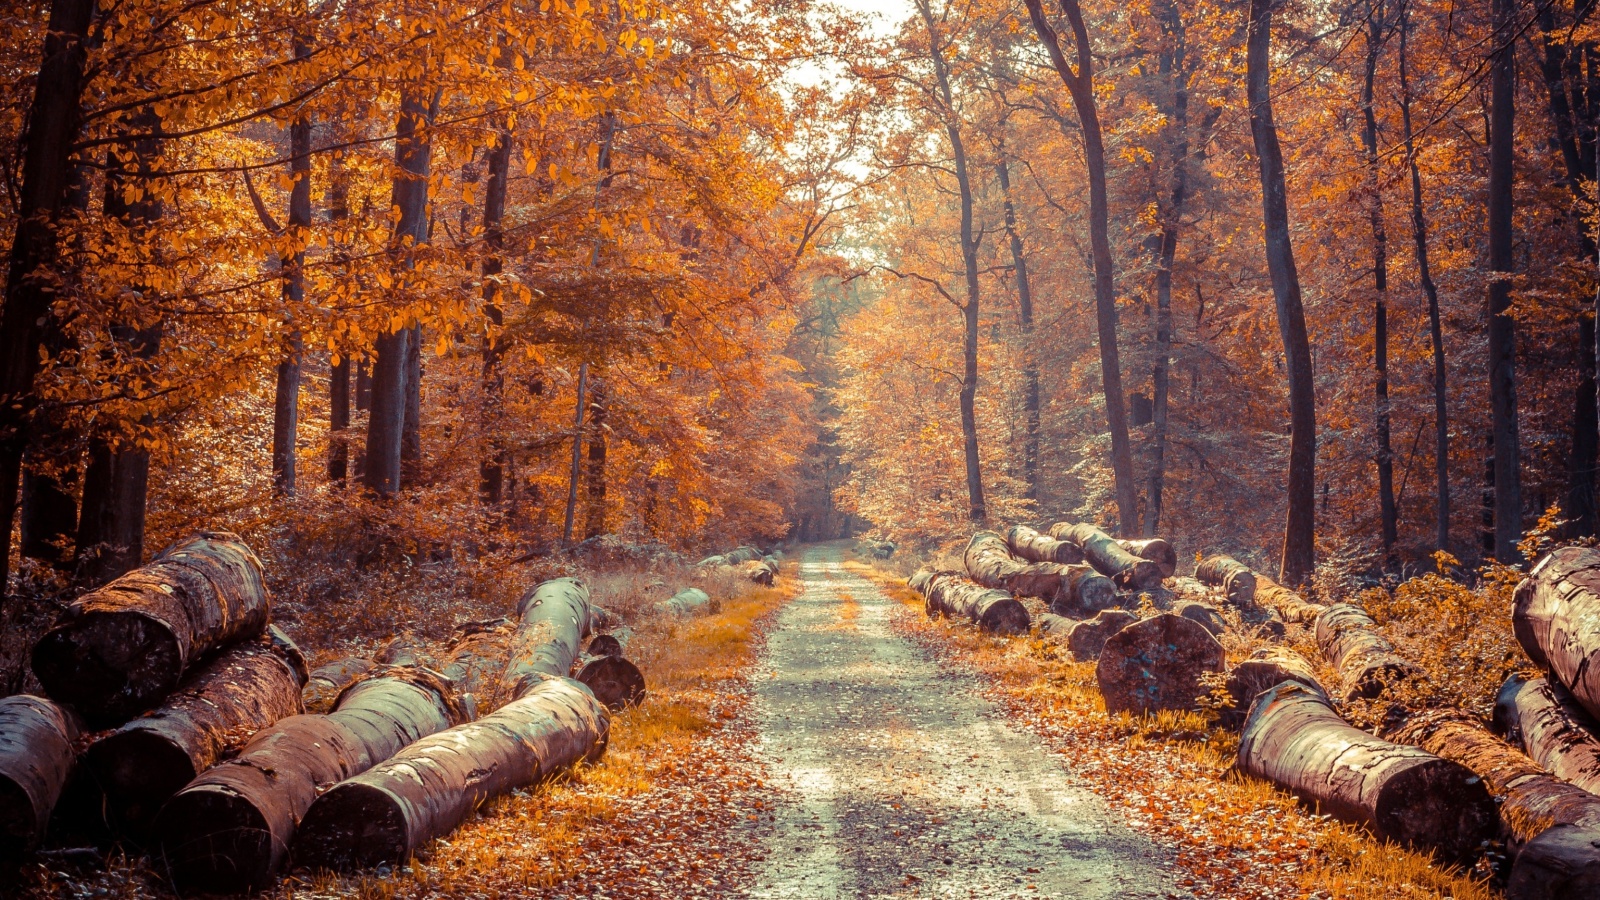 Road in the wild autumn forest wallpaper 1600x900